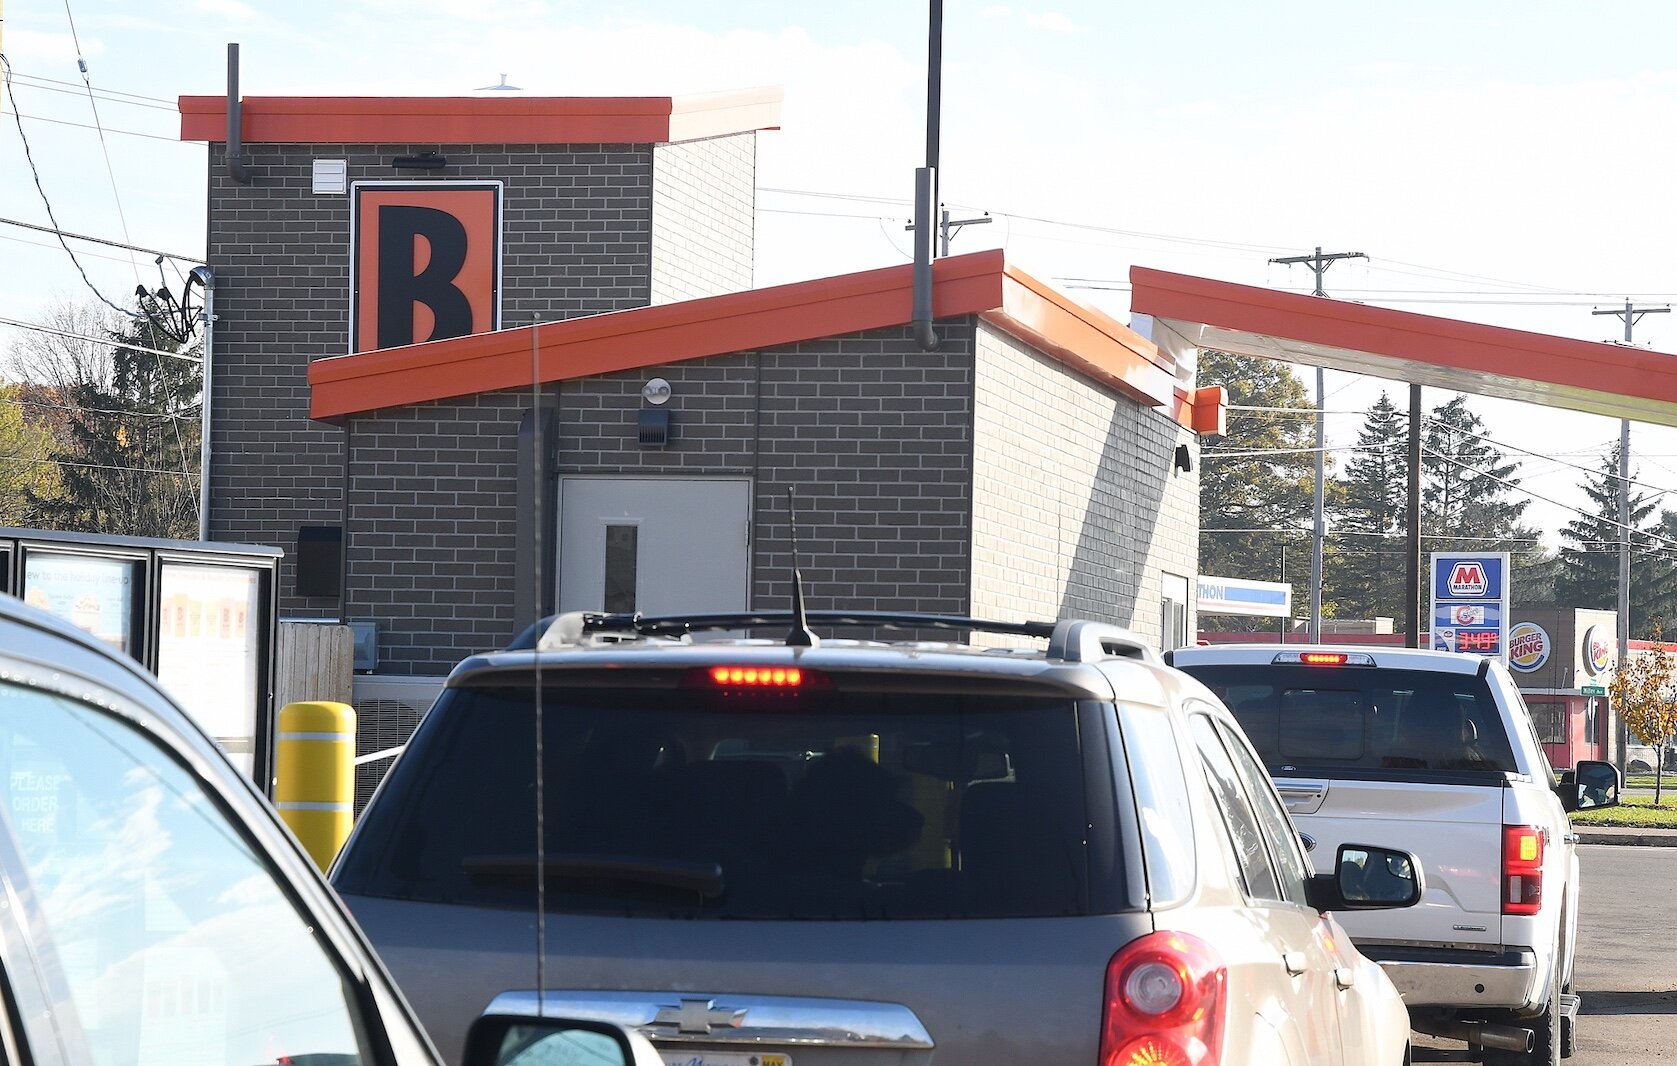 Customers drive up to the newly open drive-up Biggby Coffee shop on West Michigan Avenue in Urbandale.